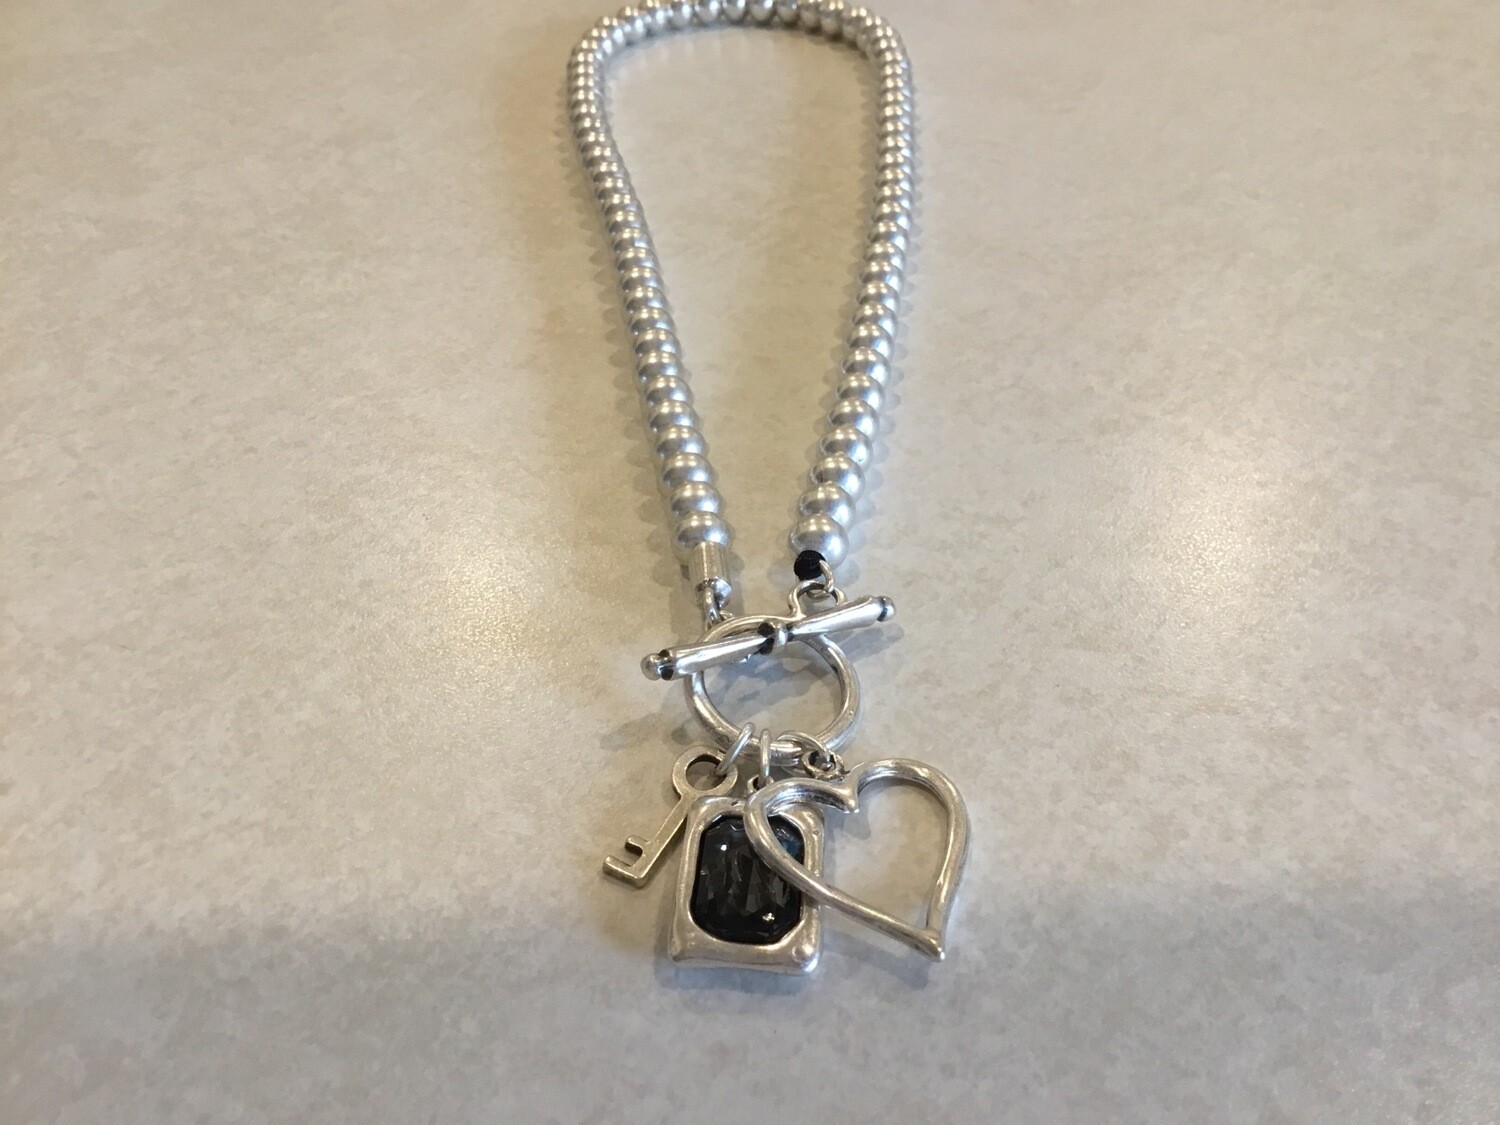 Handmade Short Pewter Necklace With Dark Crystal,Key And Heart